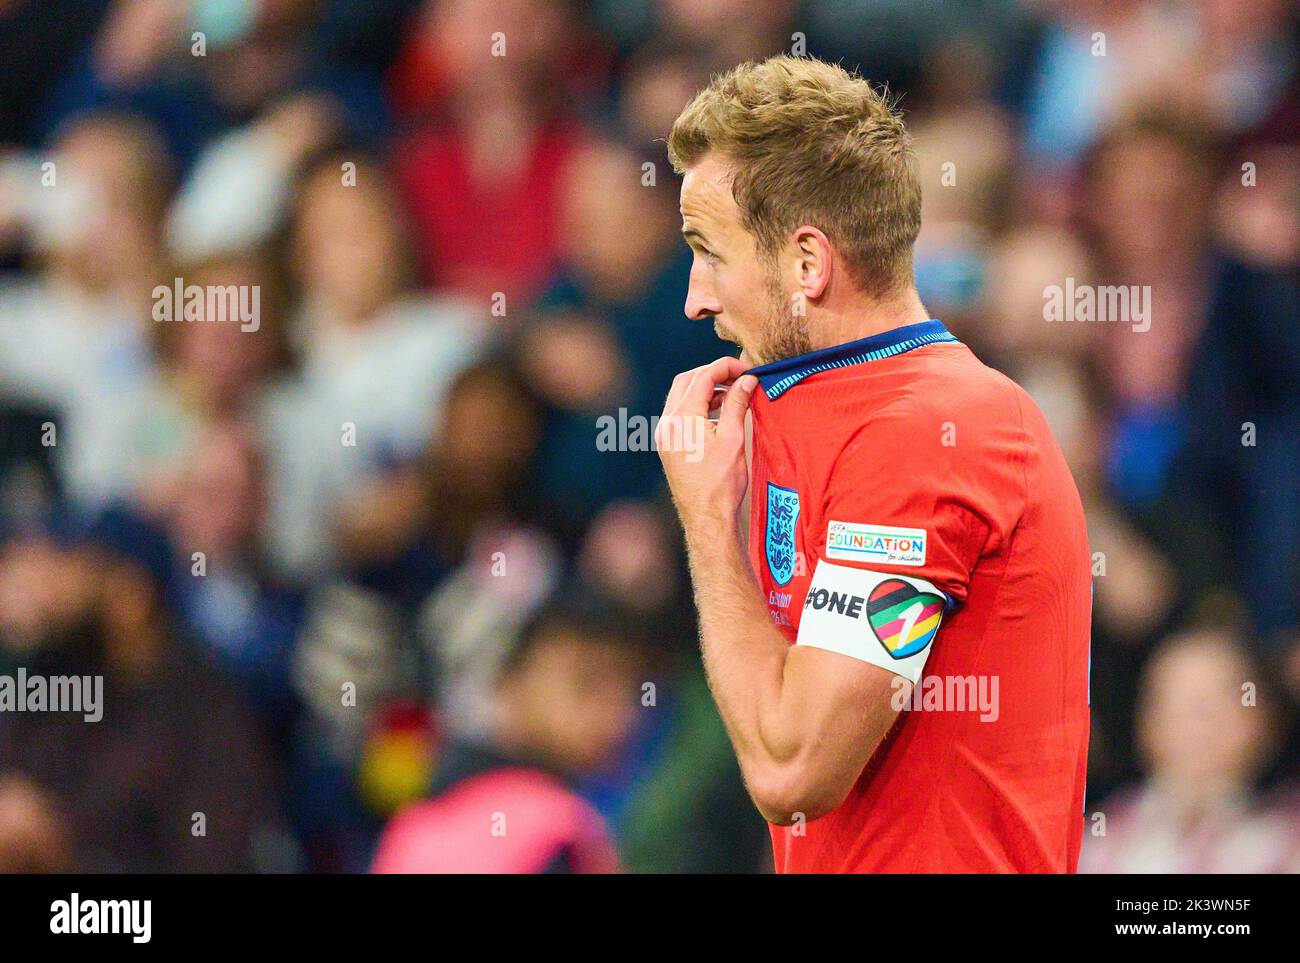 Harry KANE, England 9  celebrates his goal, happy, laugh, celebration, 3-2 in the UEFA Nations League 2022 match  ENGLAND - GERMANY 3-3  in Season 2022/2023 on Sept 26, 2022  in London, Great Britain.  © Peter Schatz / Alamy Live News Stock Photo